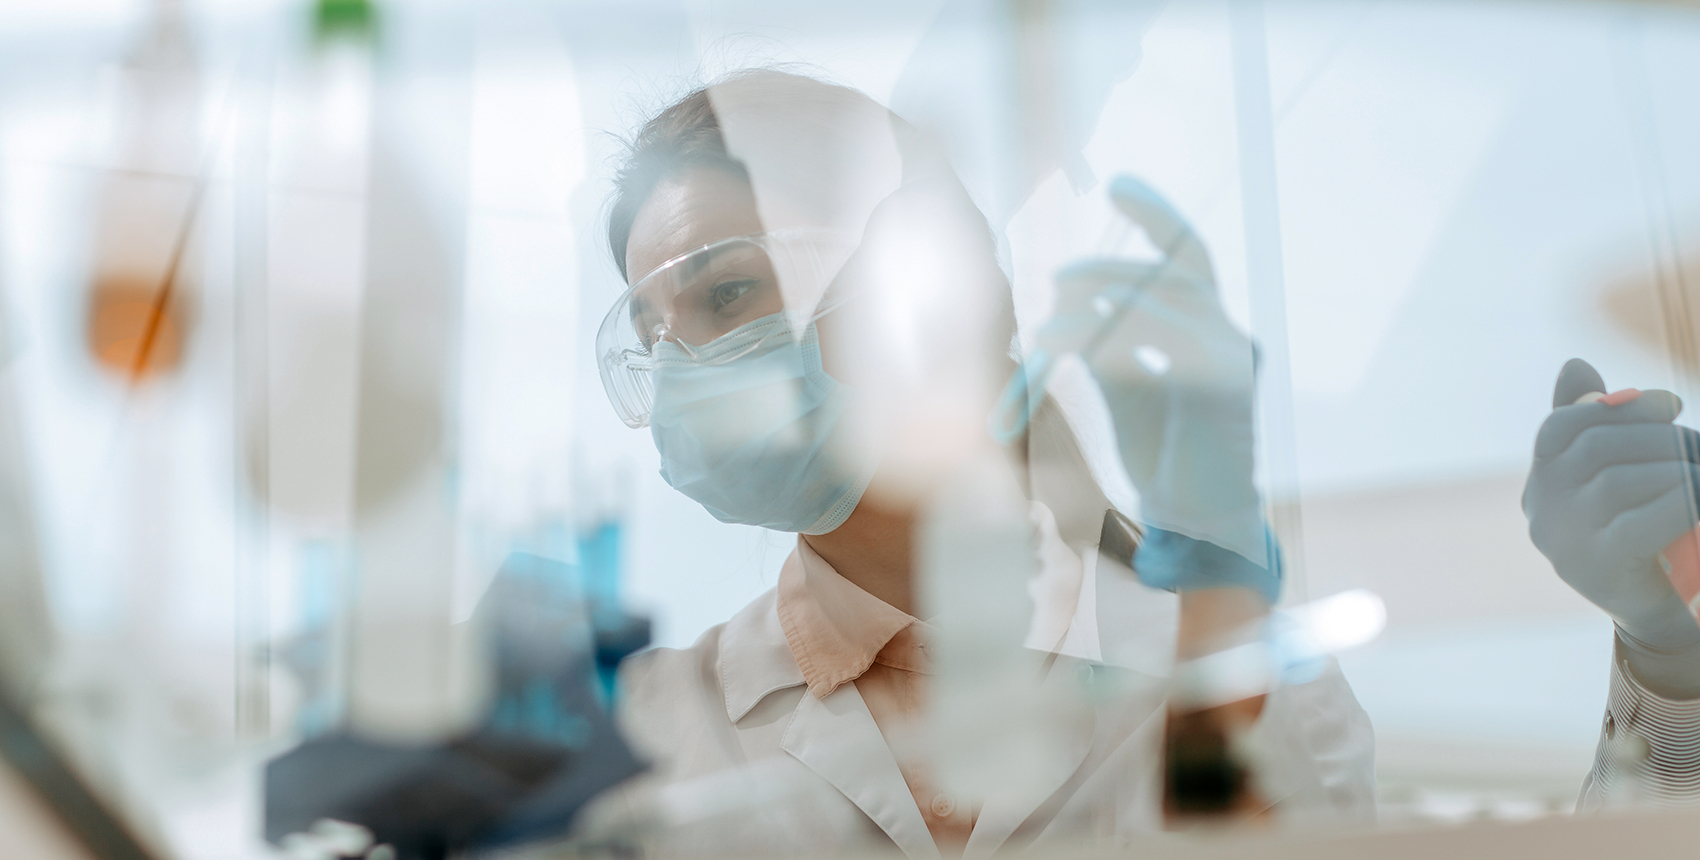 A woman in goggles mask and lab coat working at a laboratory table seen through the reflections and refractions on a safety glass window.